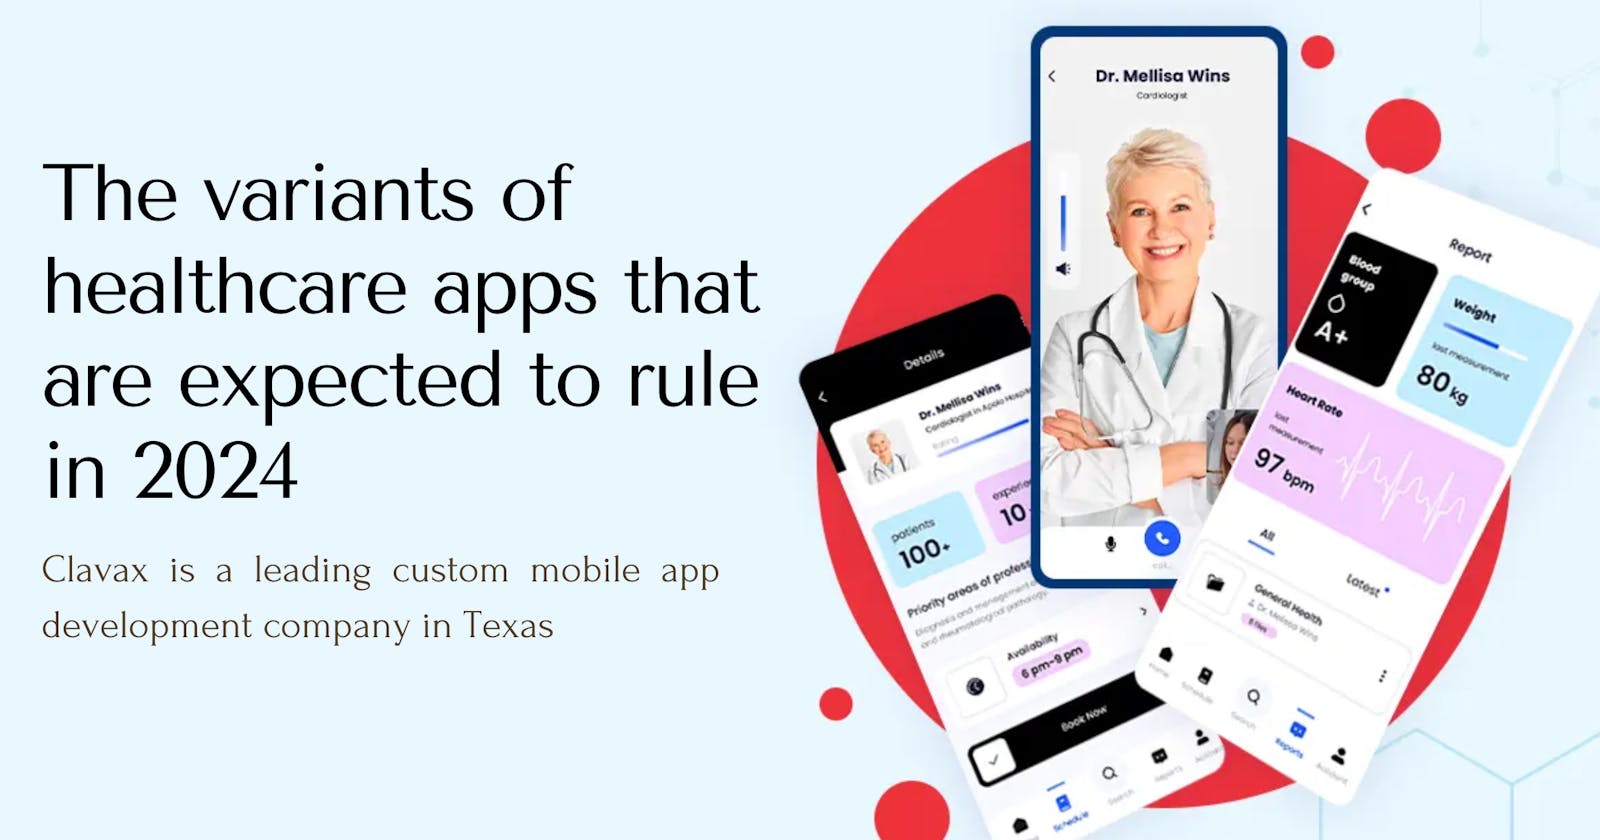 The variants of healthcare apps that are expected to rule in 2024